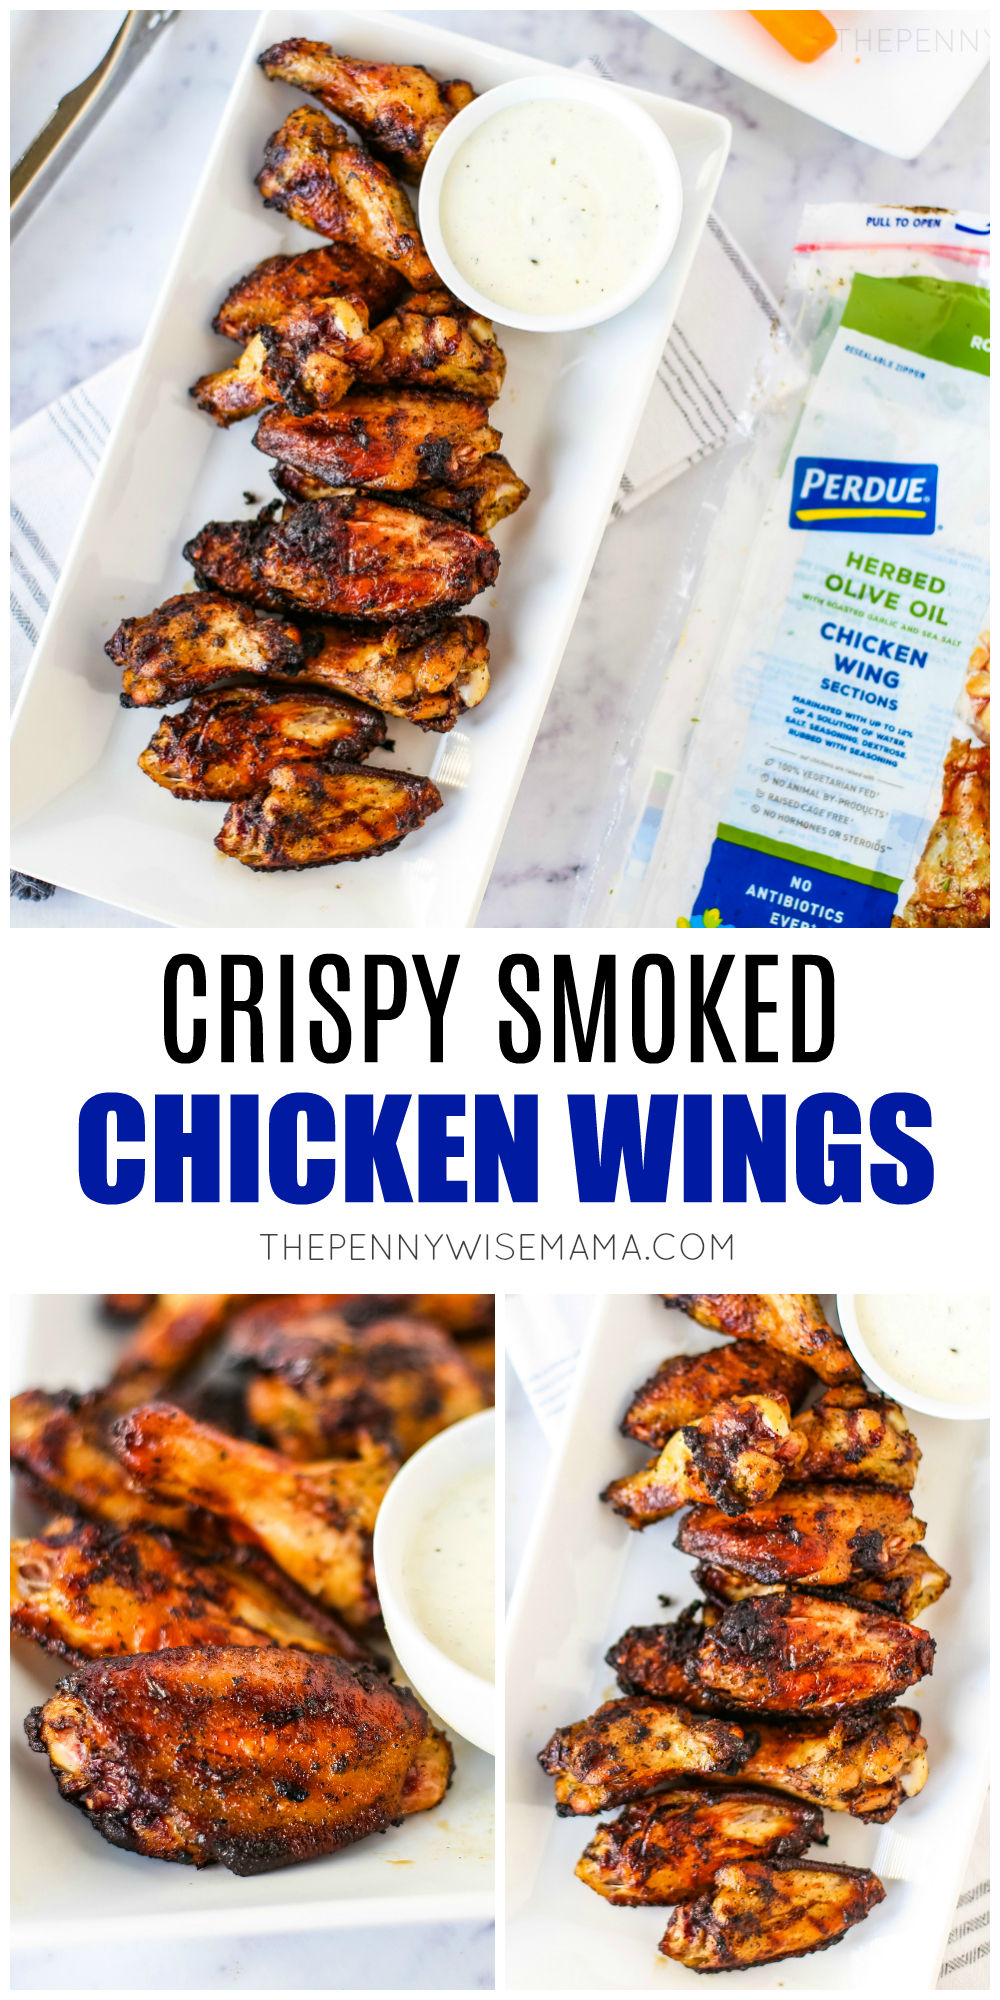 Looking for the best crispy, smoked chicken wings? These wings are not only delicious and easy to make, but they are also perfectly crispy! Click to see how to make them, plus see how Perdue Farms' new home delivery bundle boxes can help save you time.